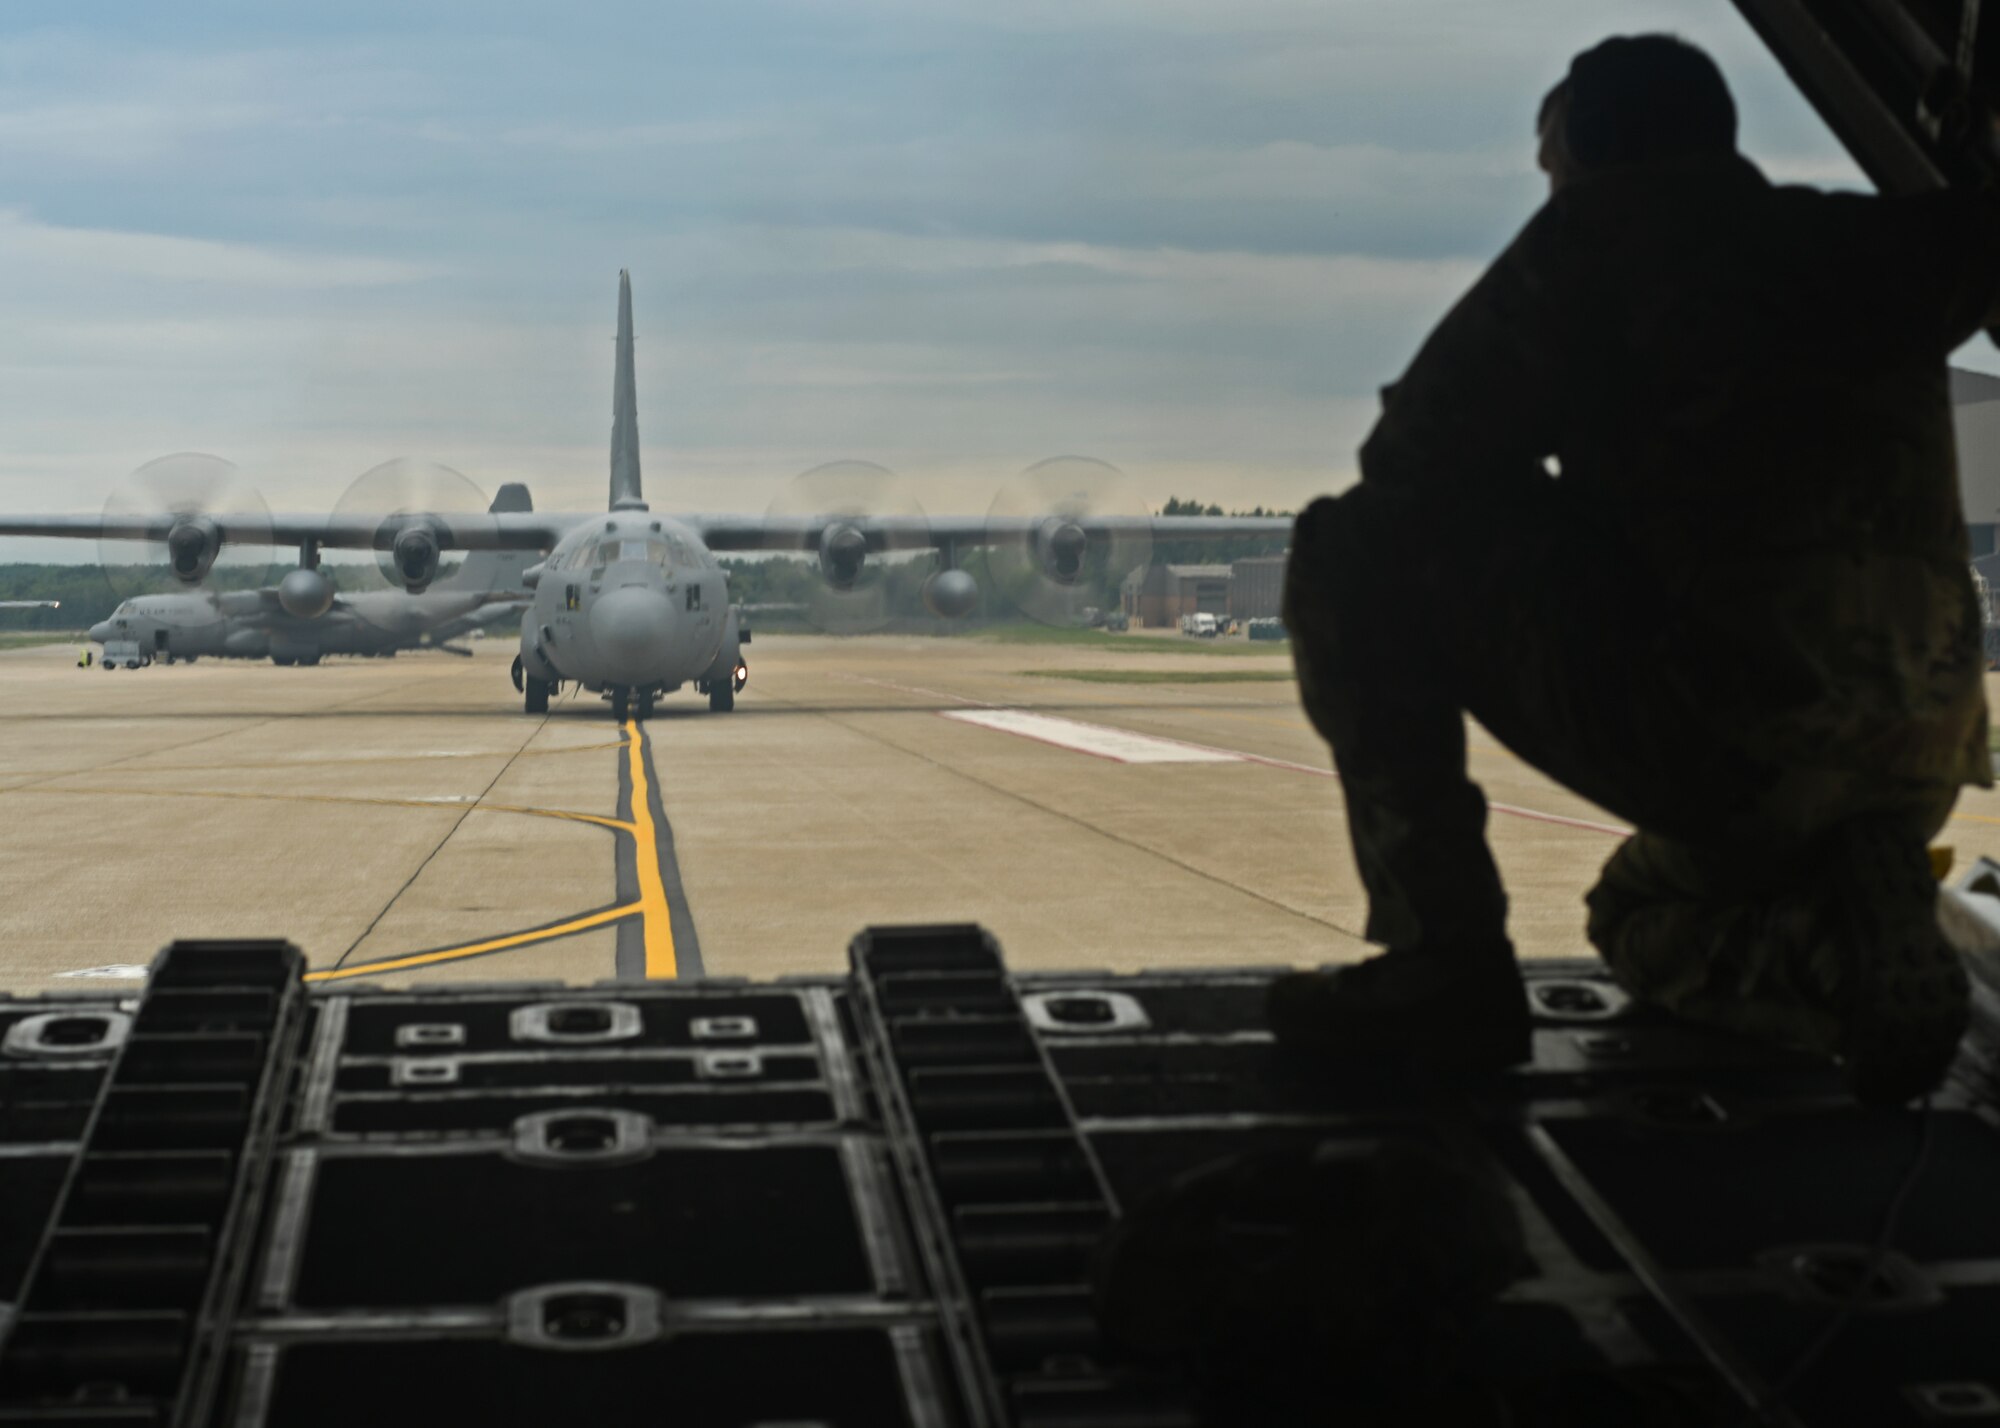 Staff Sgt. Jed Pickett, 700th Aerial Squadron loadmaster, talks with the pilot as a C-130 Hercules backs up on the military ramp at Youngstown Air Reserve Station, Ohio, Aug. 7, 2018. When backing an aircraft, the loadmasters are responsible for directing the pilots by looking out the back of the aircraft and communicating what to do. This is useful to navigate small or congested airfields that don’t have much space, such as those that may be encountered in theater. (U.S. Air Force photo by Staff Sgt. Miles Wilson)